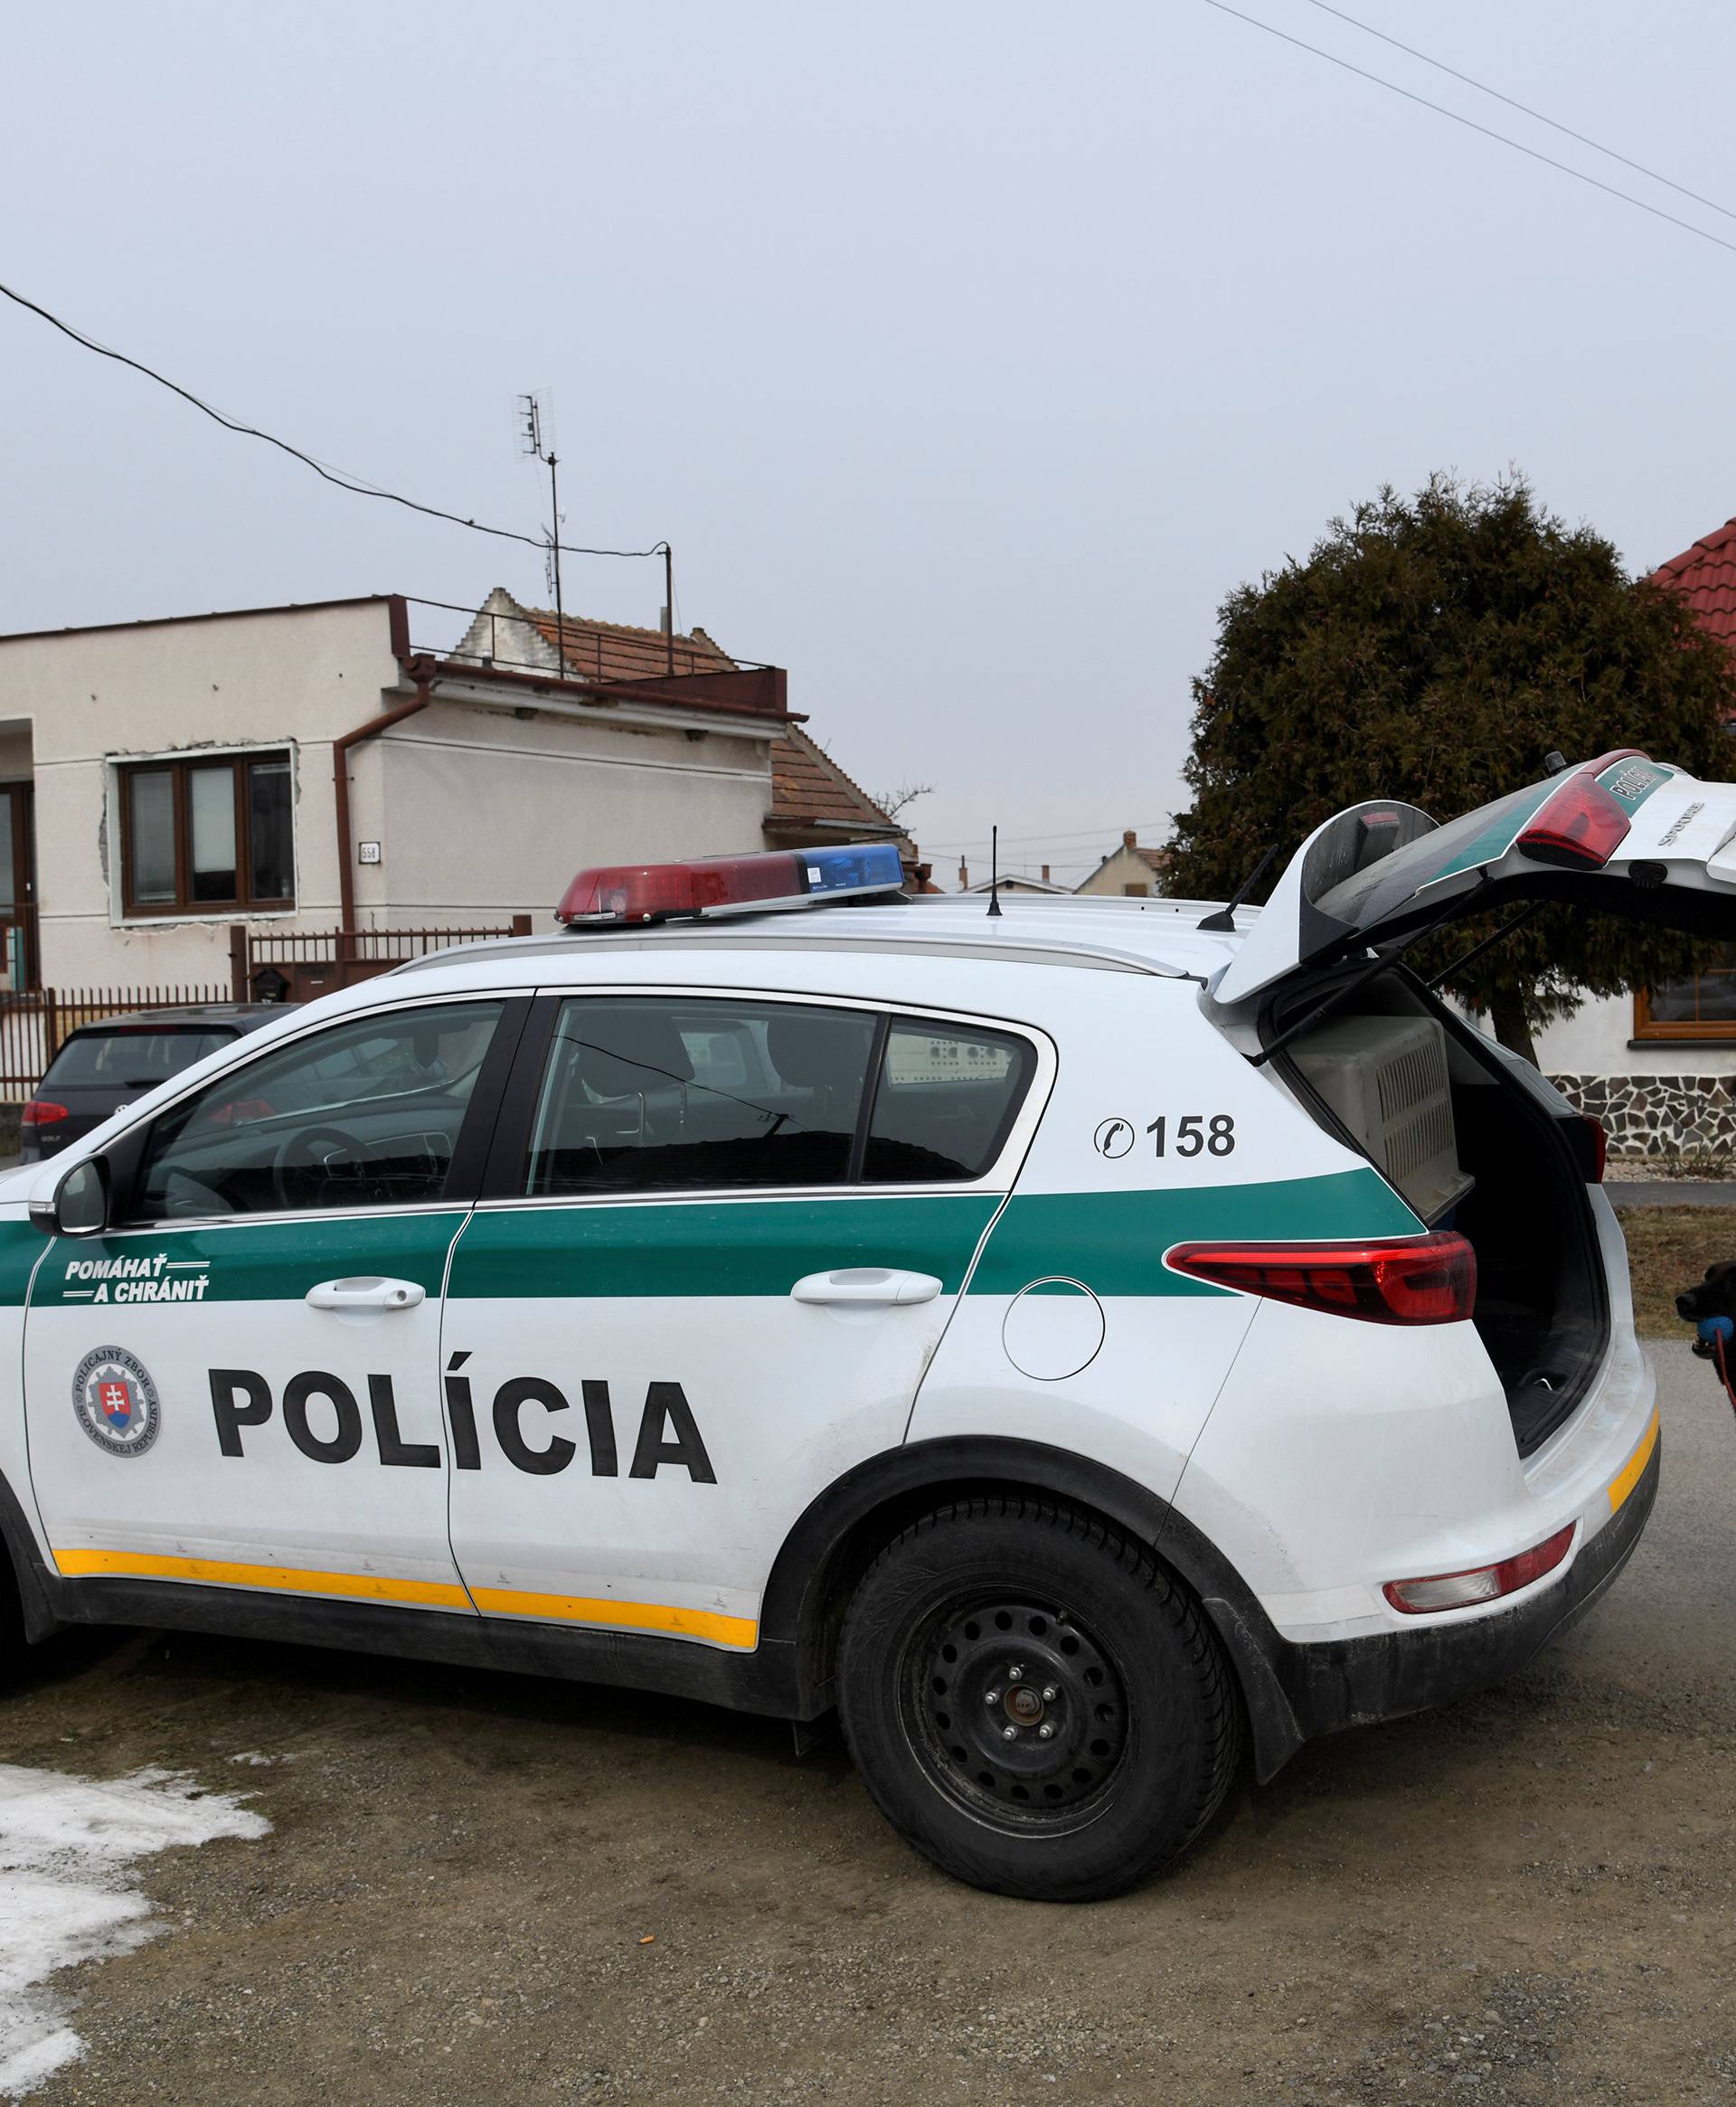 A police officer with a dog is seen near a house where Slovak investigative journalist Jan Kuciak and his girlfriend Martina Kusnirova lived and were murdered in the village of Velka Maca